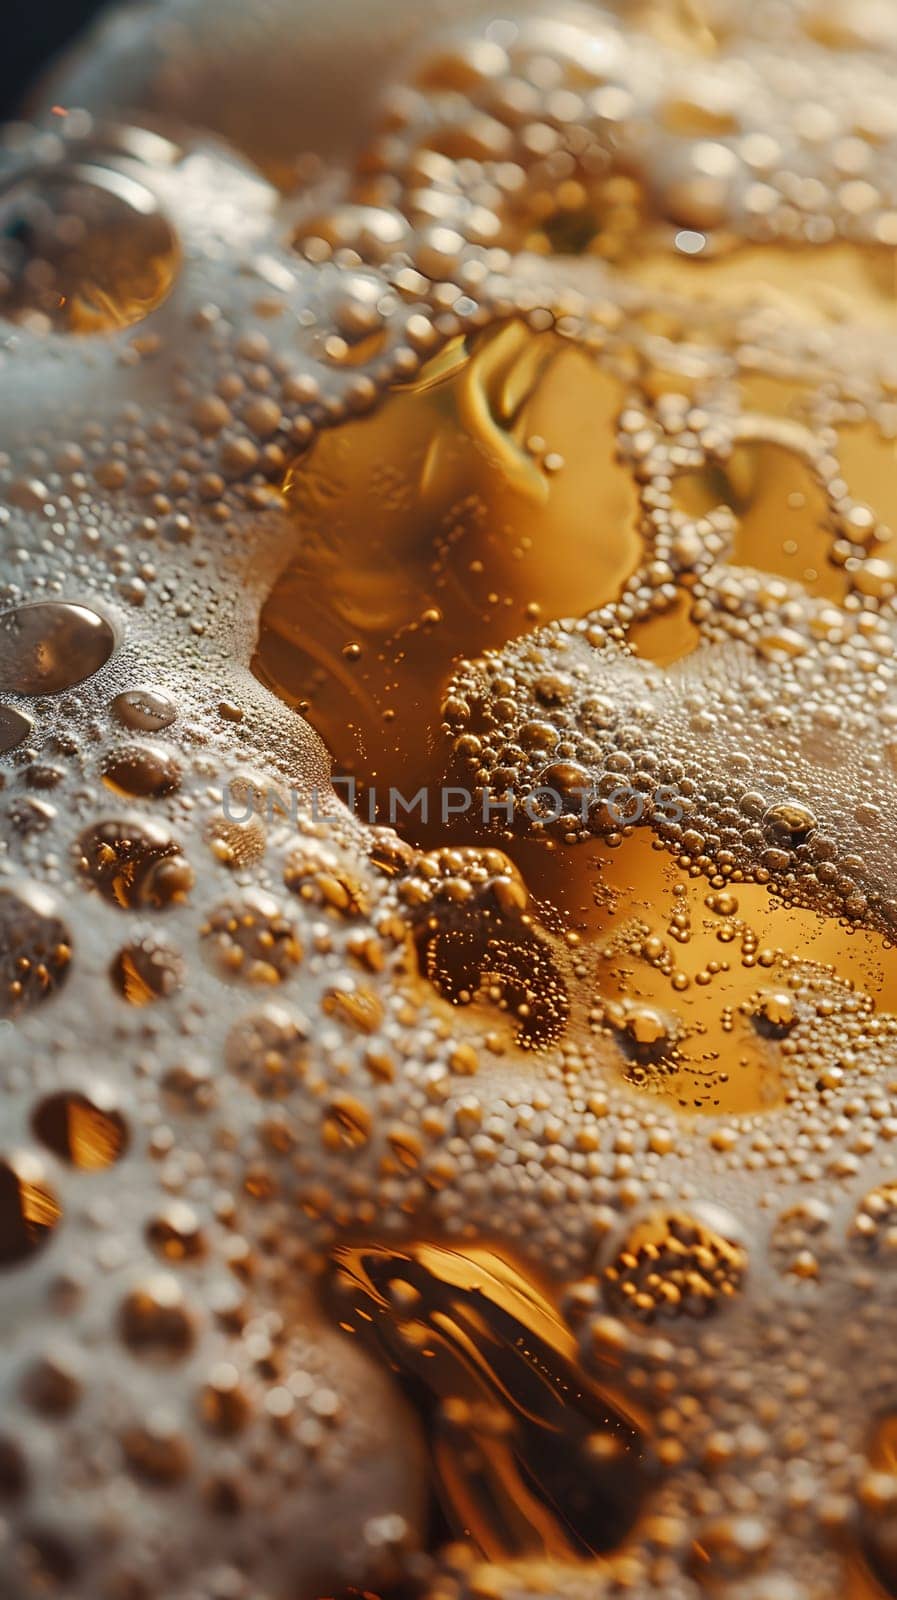 Macro photography capturing bubbles in beer glass, showcasing art in nature by Nadtochiy